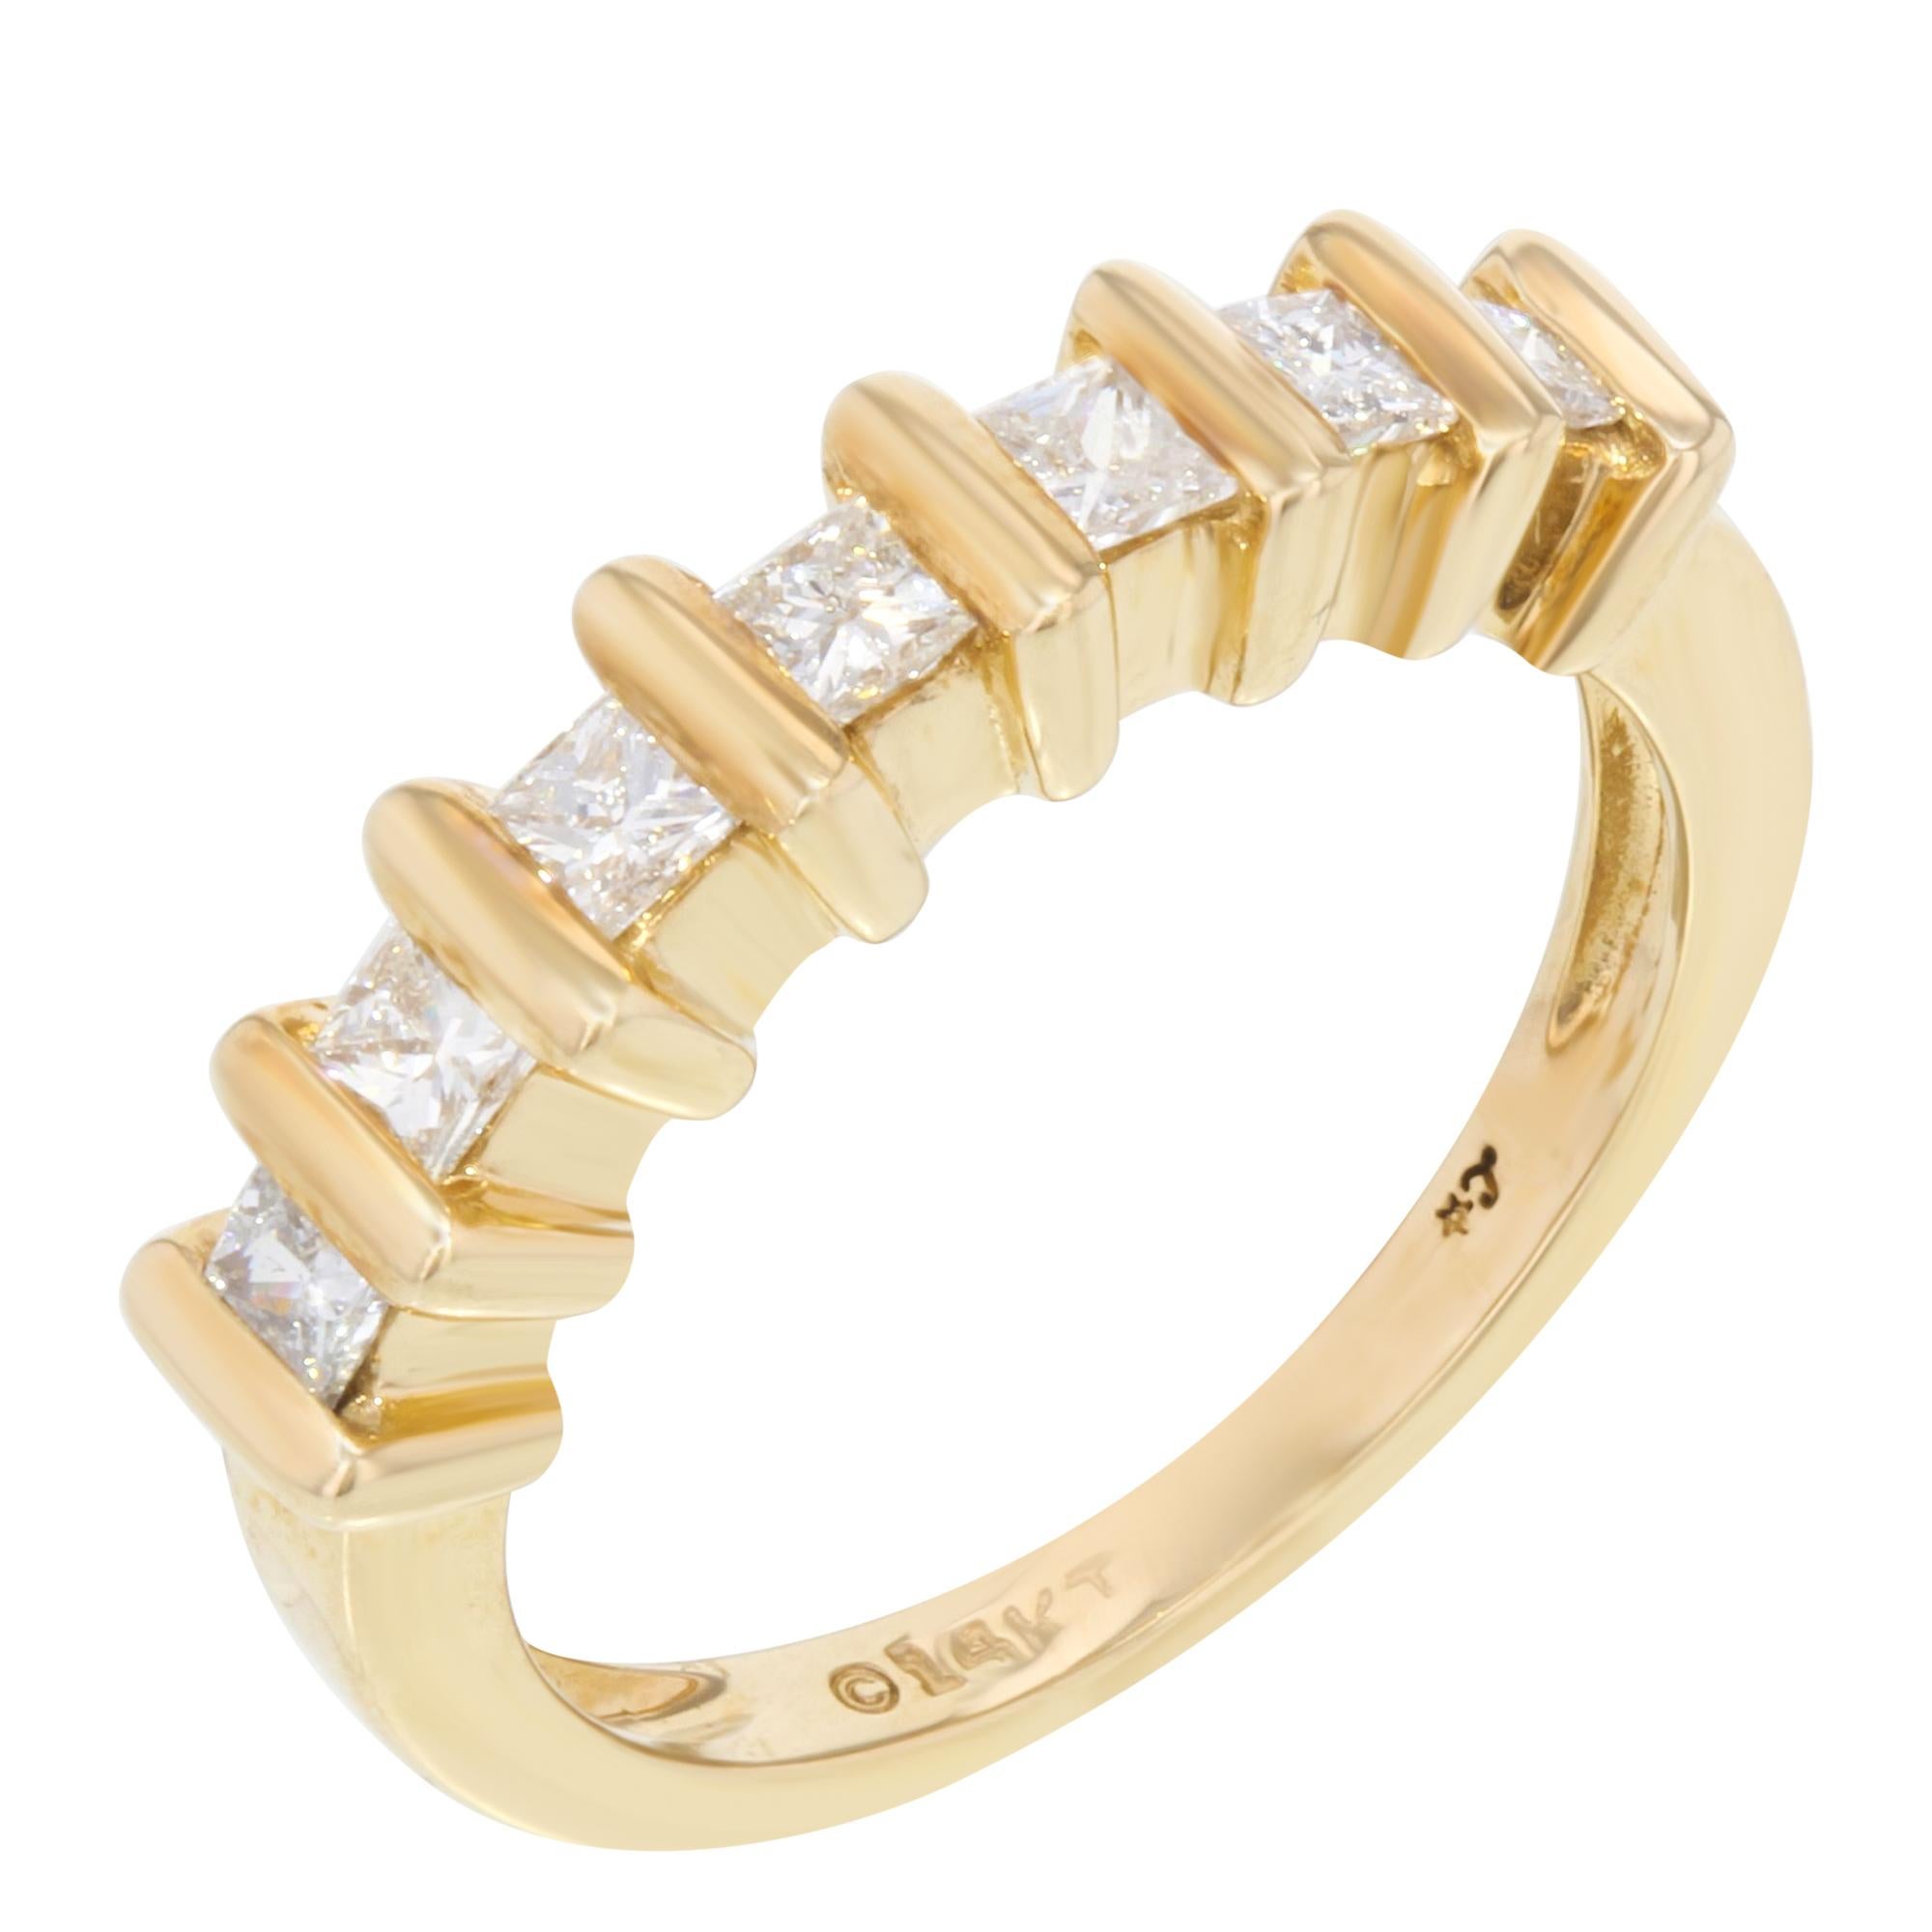 This beautifully crafted yellow gold diamond princess-cut wedding band setting is breathtaking. There are 7 princess-cut diamonds in bar setting of G-H color, SI1-SI2 clarity, weighing 0.45 carats. Express your unending love for one another with